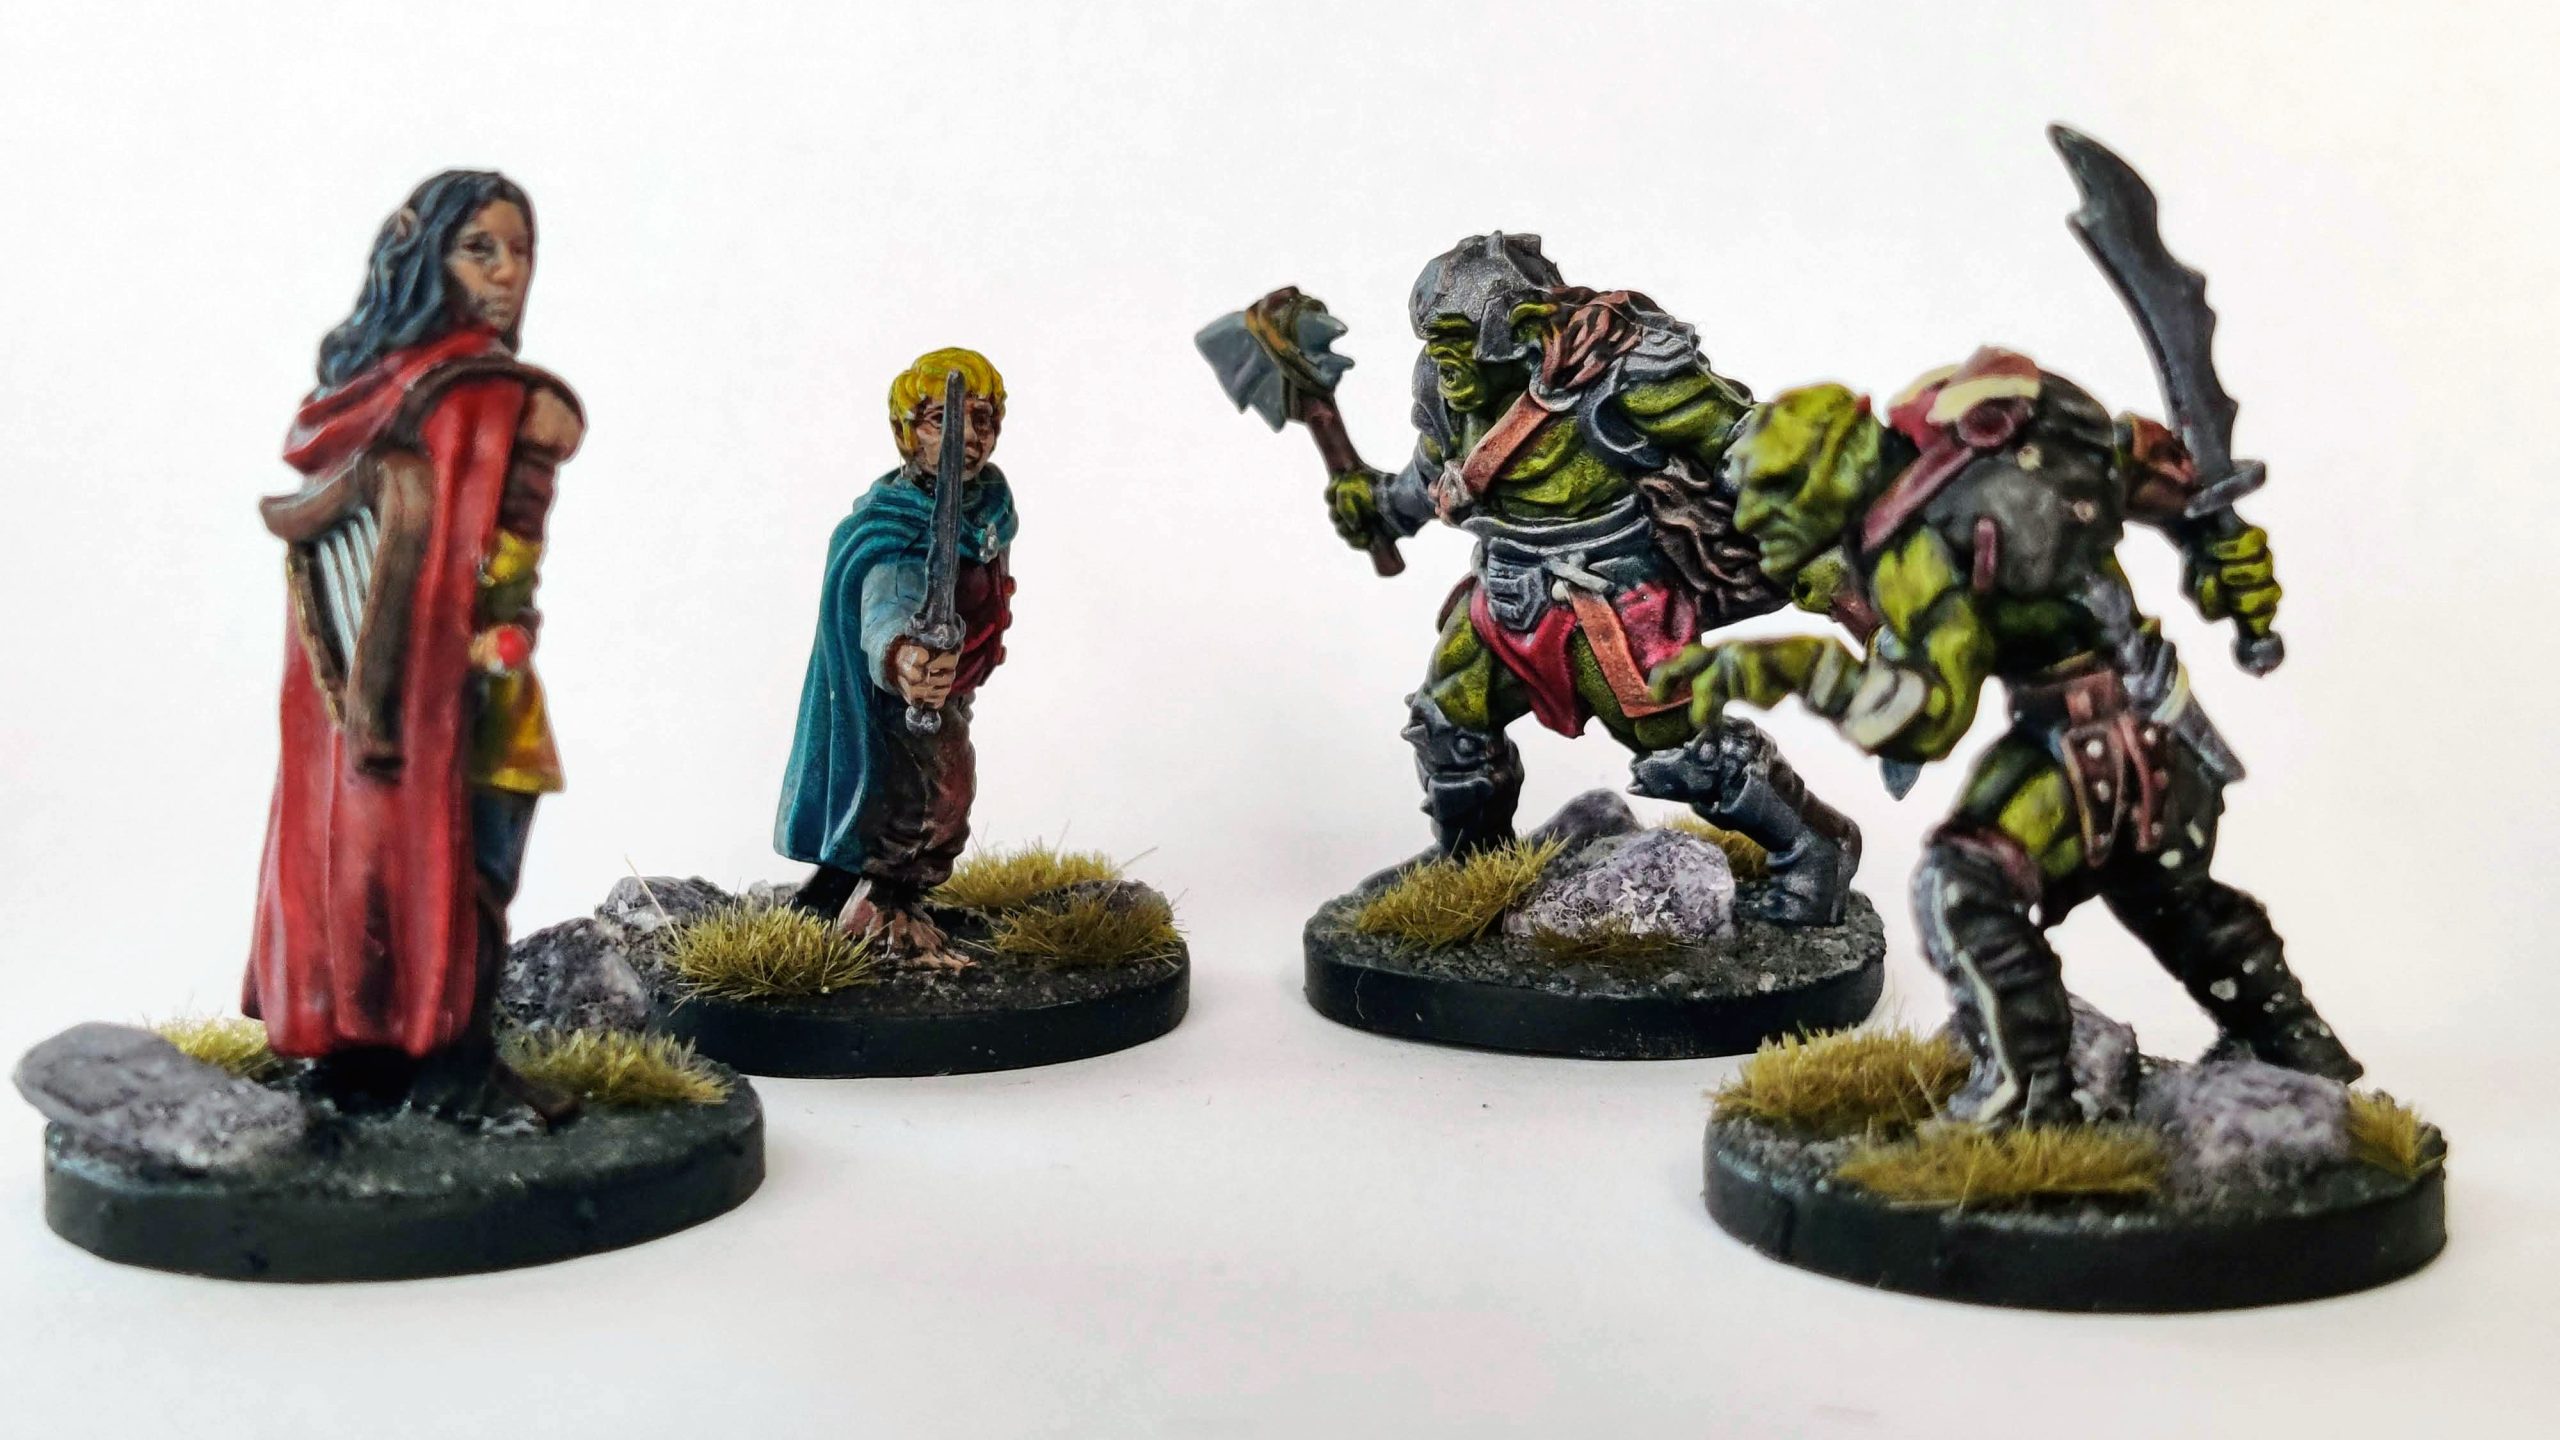 Elena and Bilbo against a goblin and an orc, from Lord of the Rings: Journeys in Middle Earth. Painted with Speedpaints 2.0.